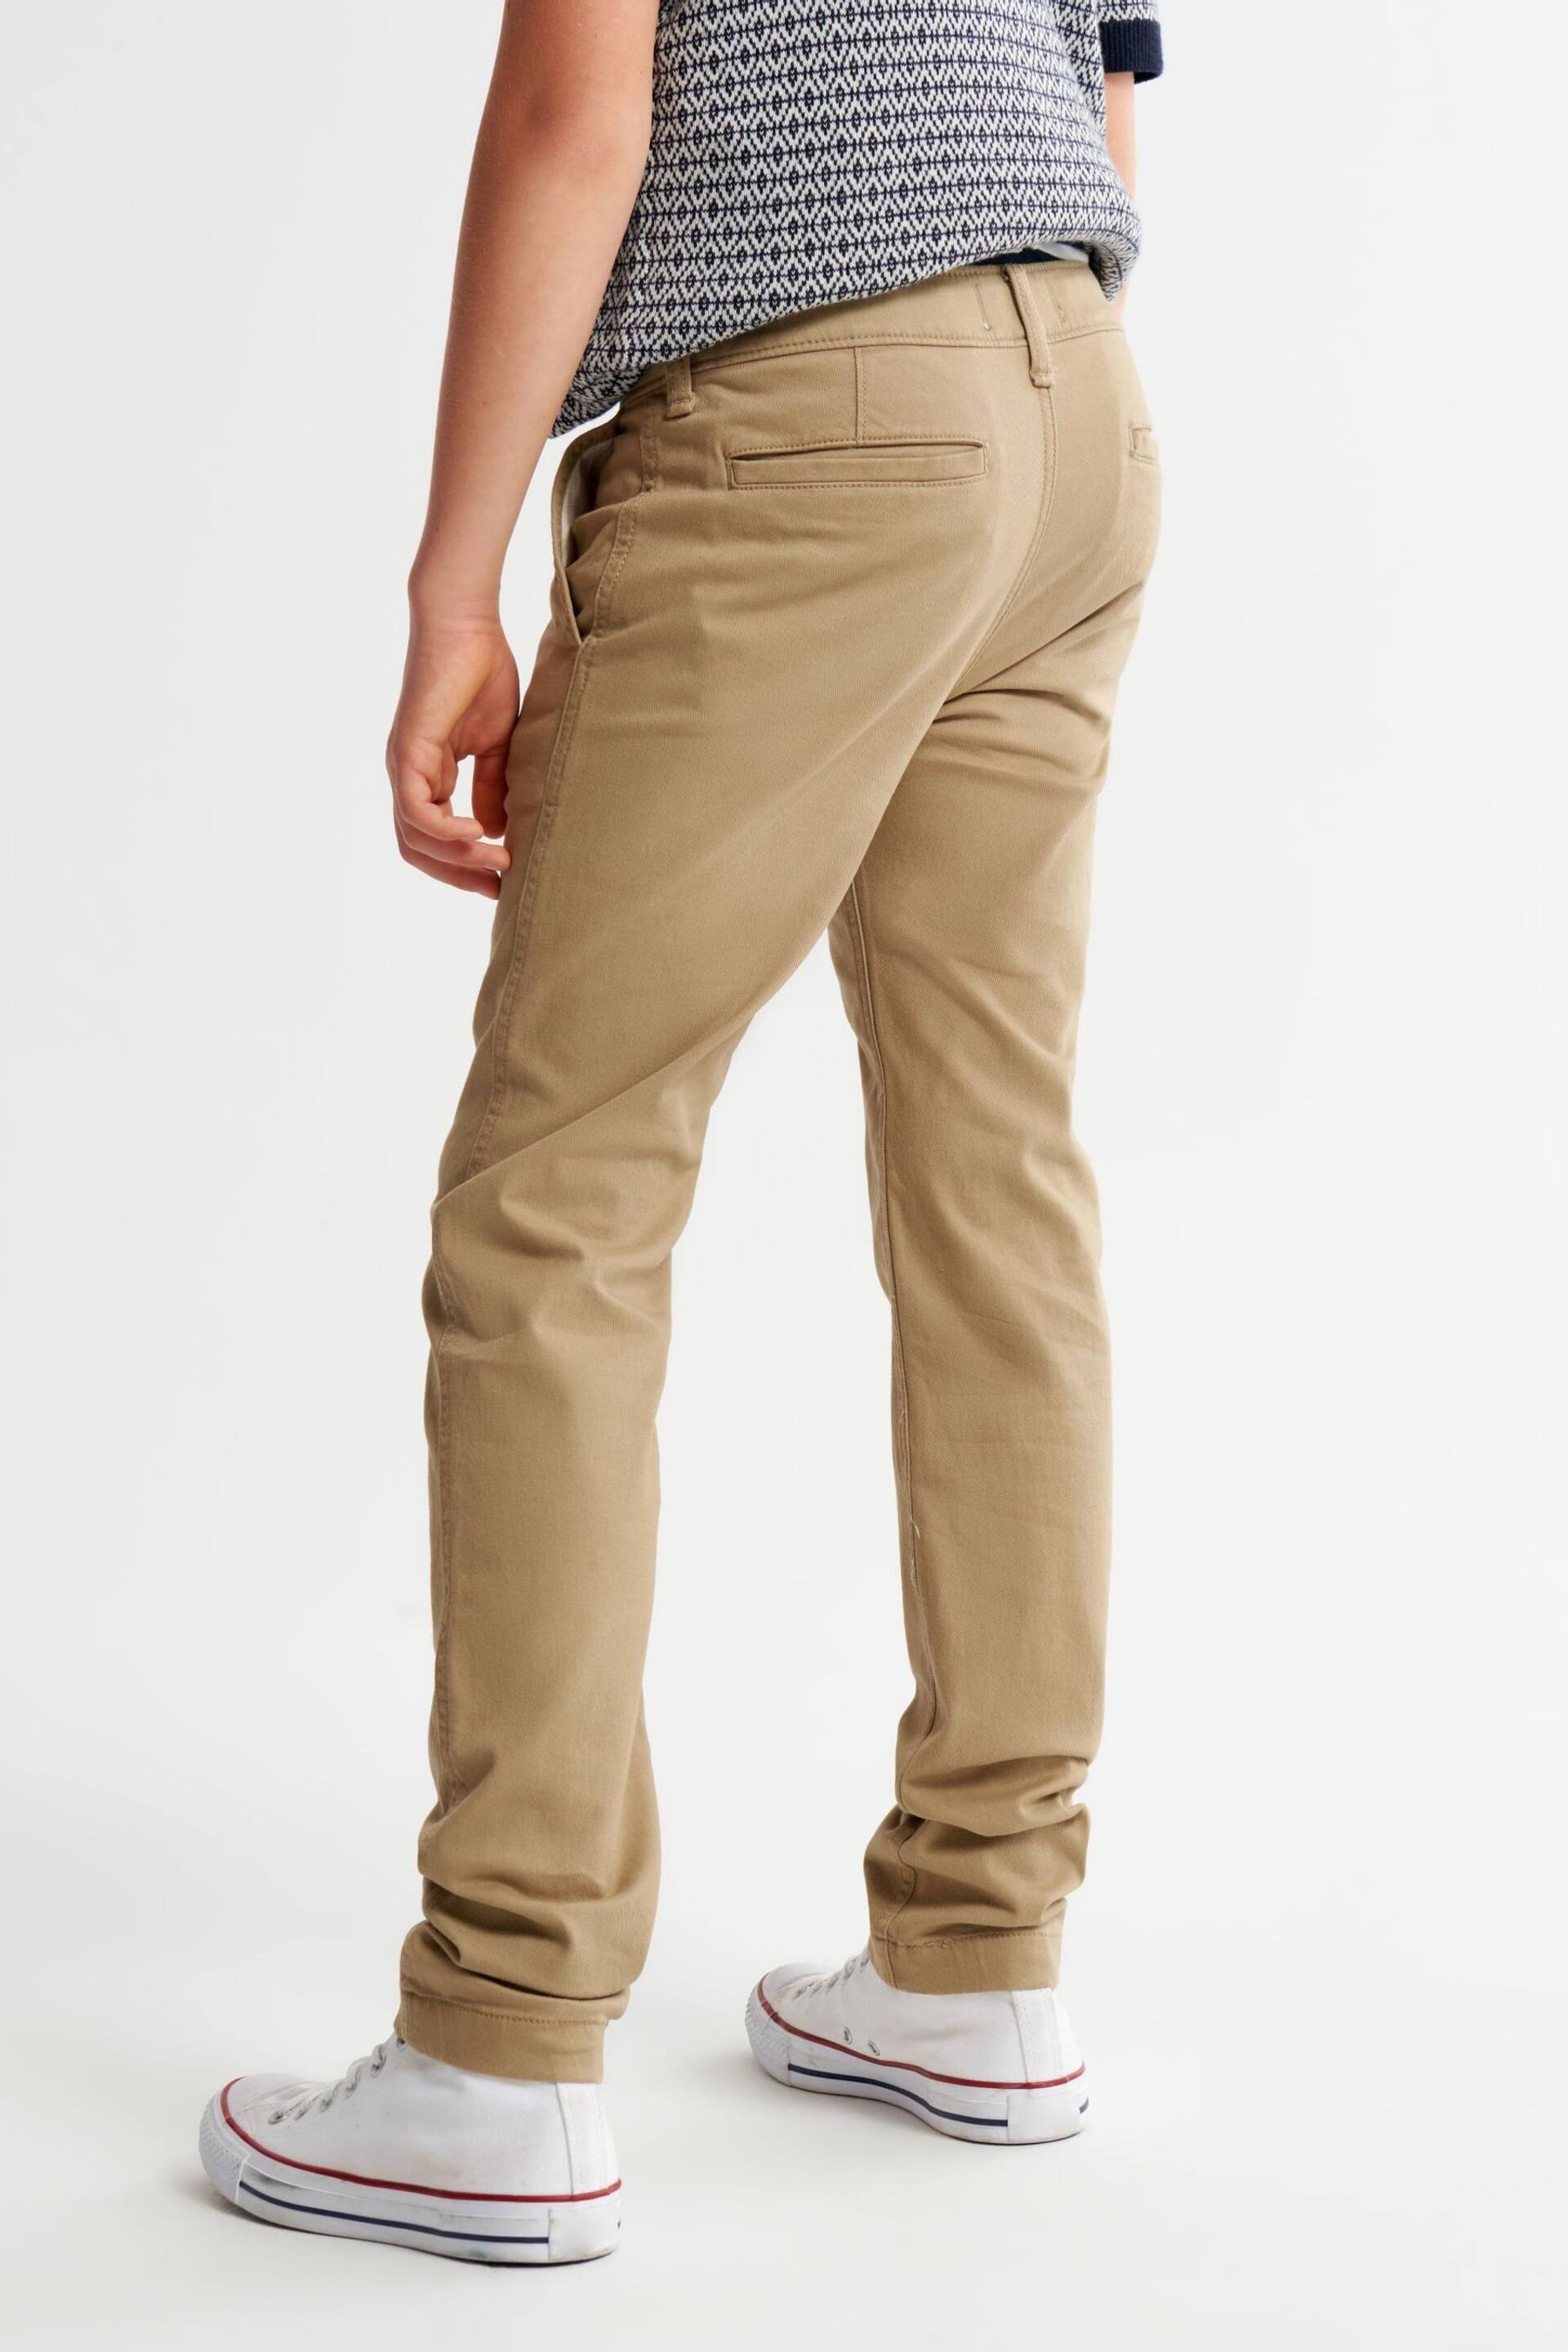 Abercrombie & Fitch Twill Smart Chino Brown Trousers - Image 2 of 5